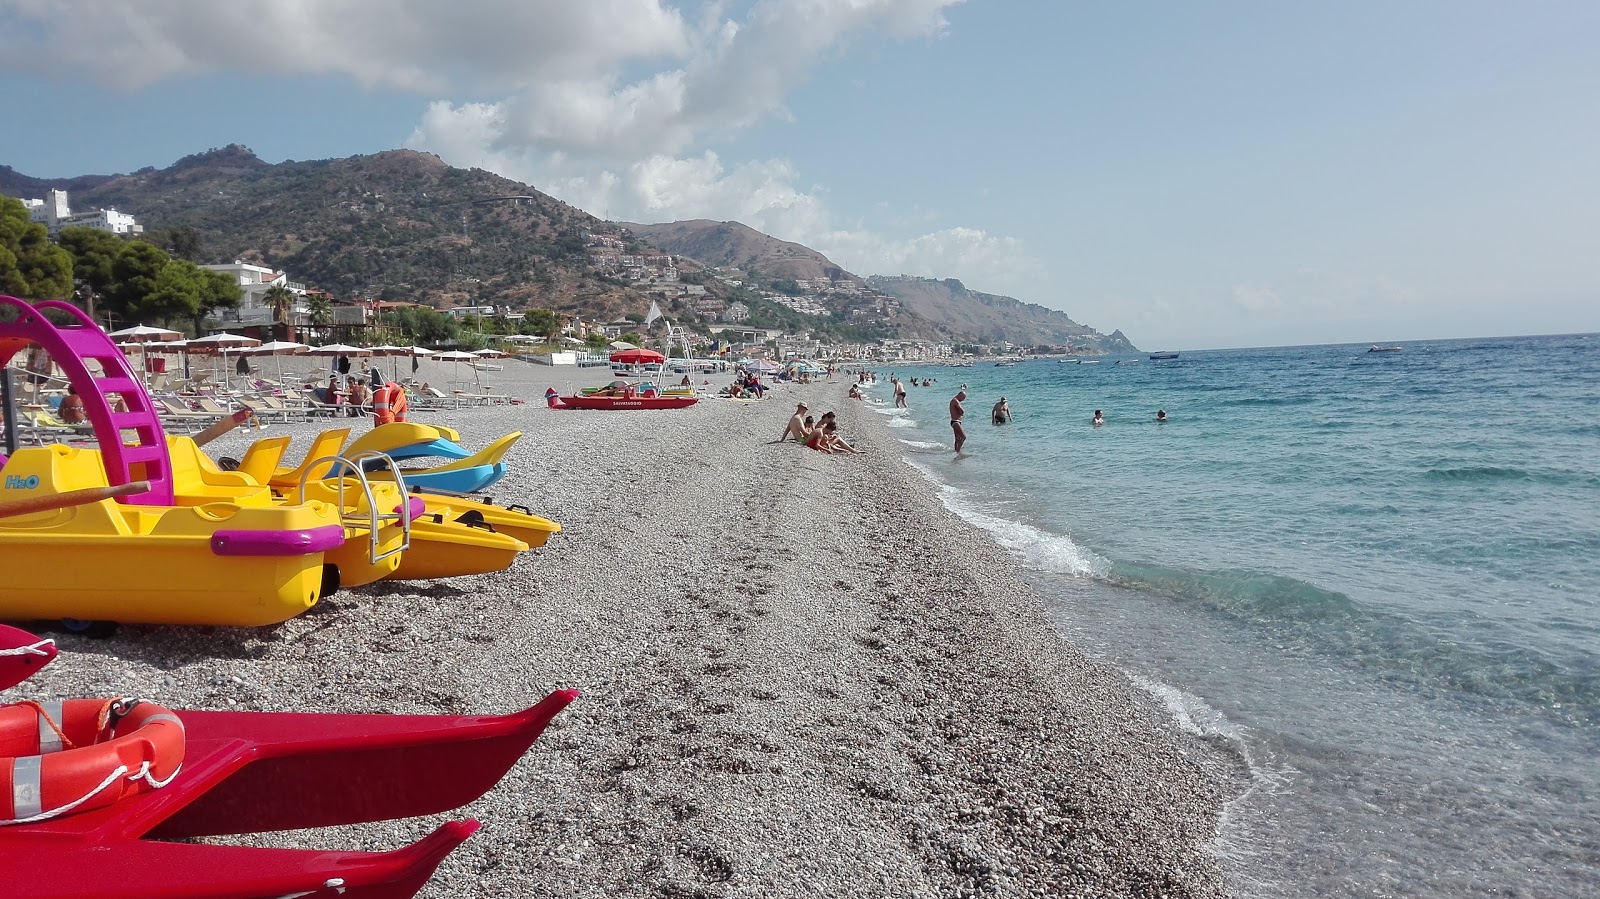 Photo of Spiaggia di Mazzeo - popular place among relax connoisseurs